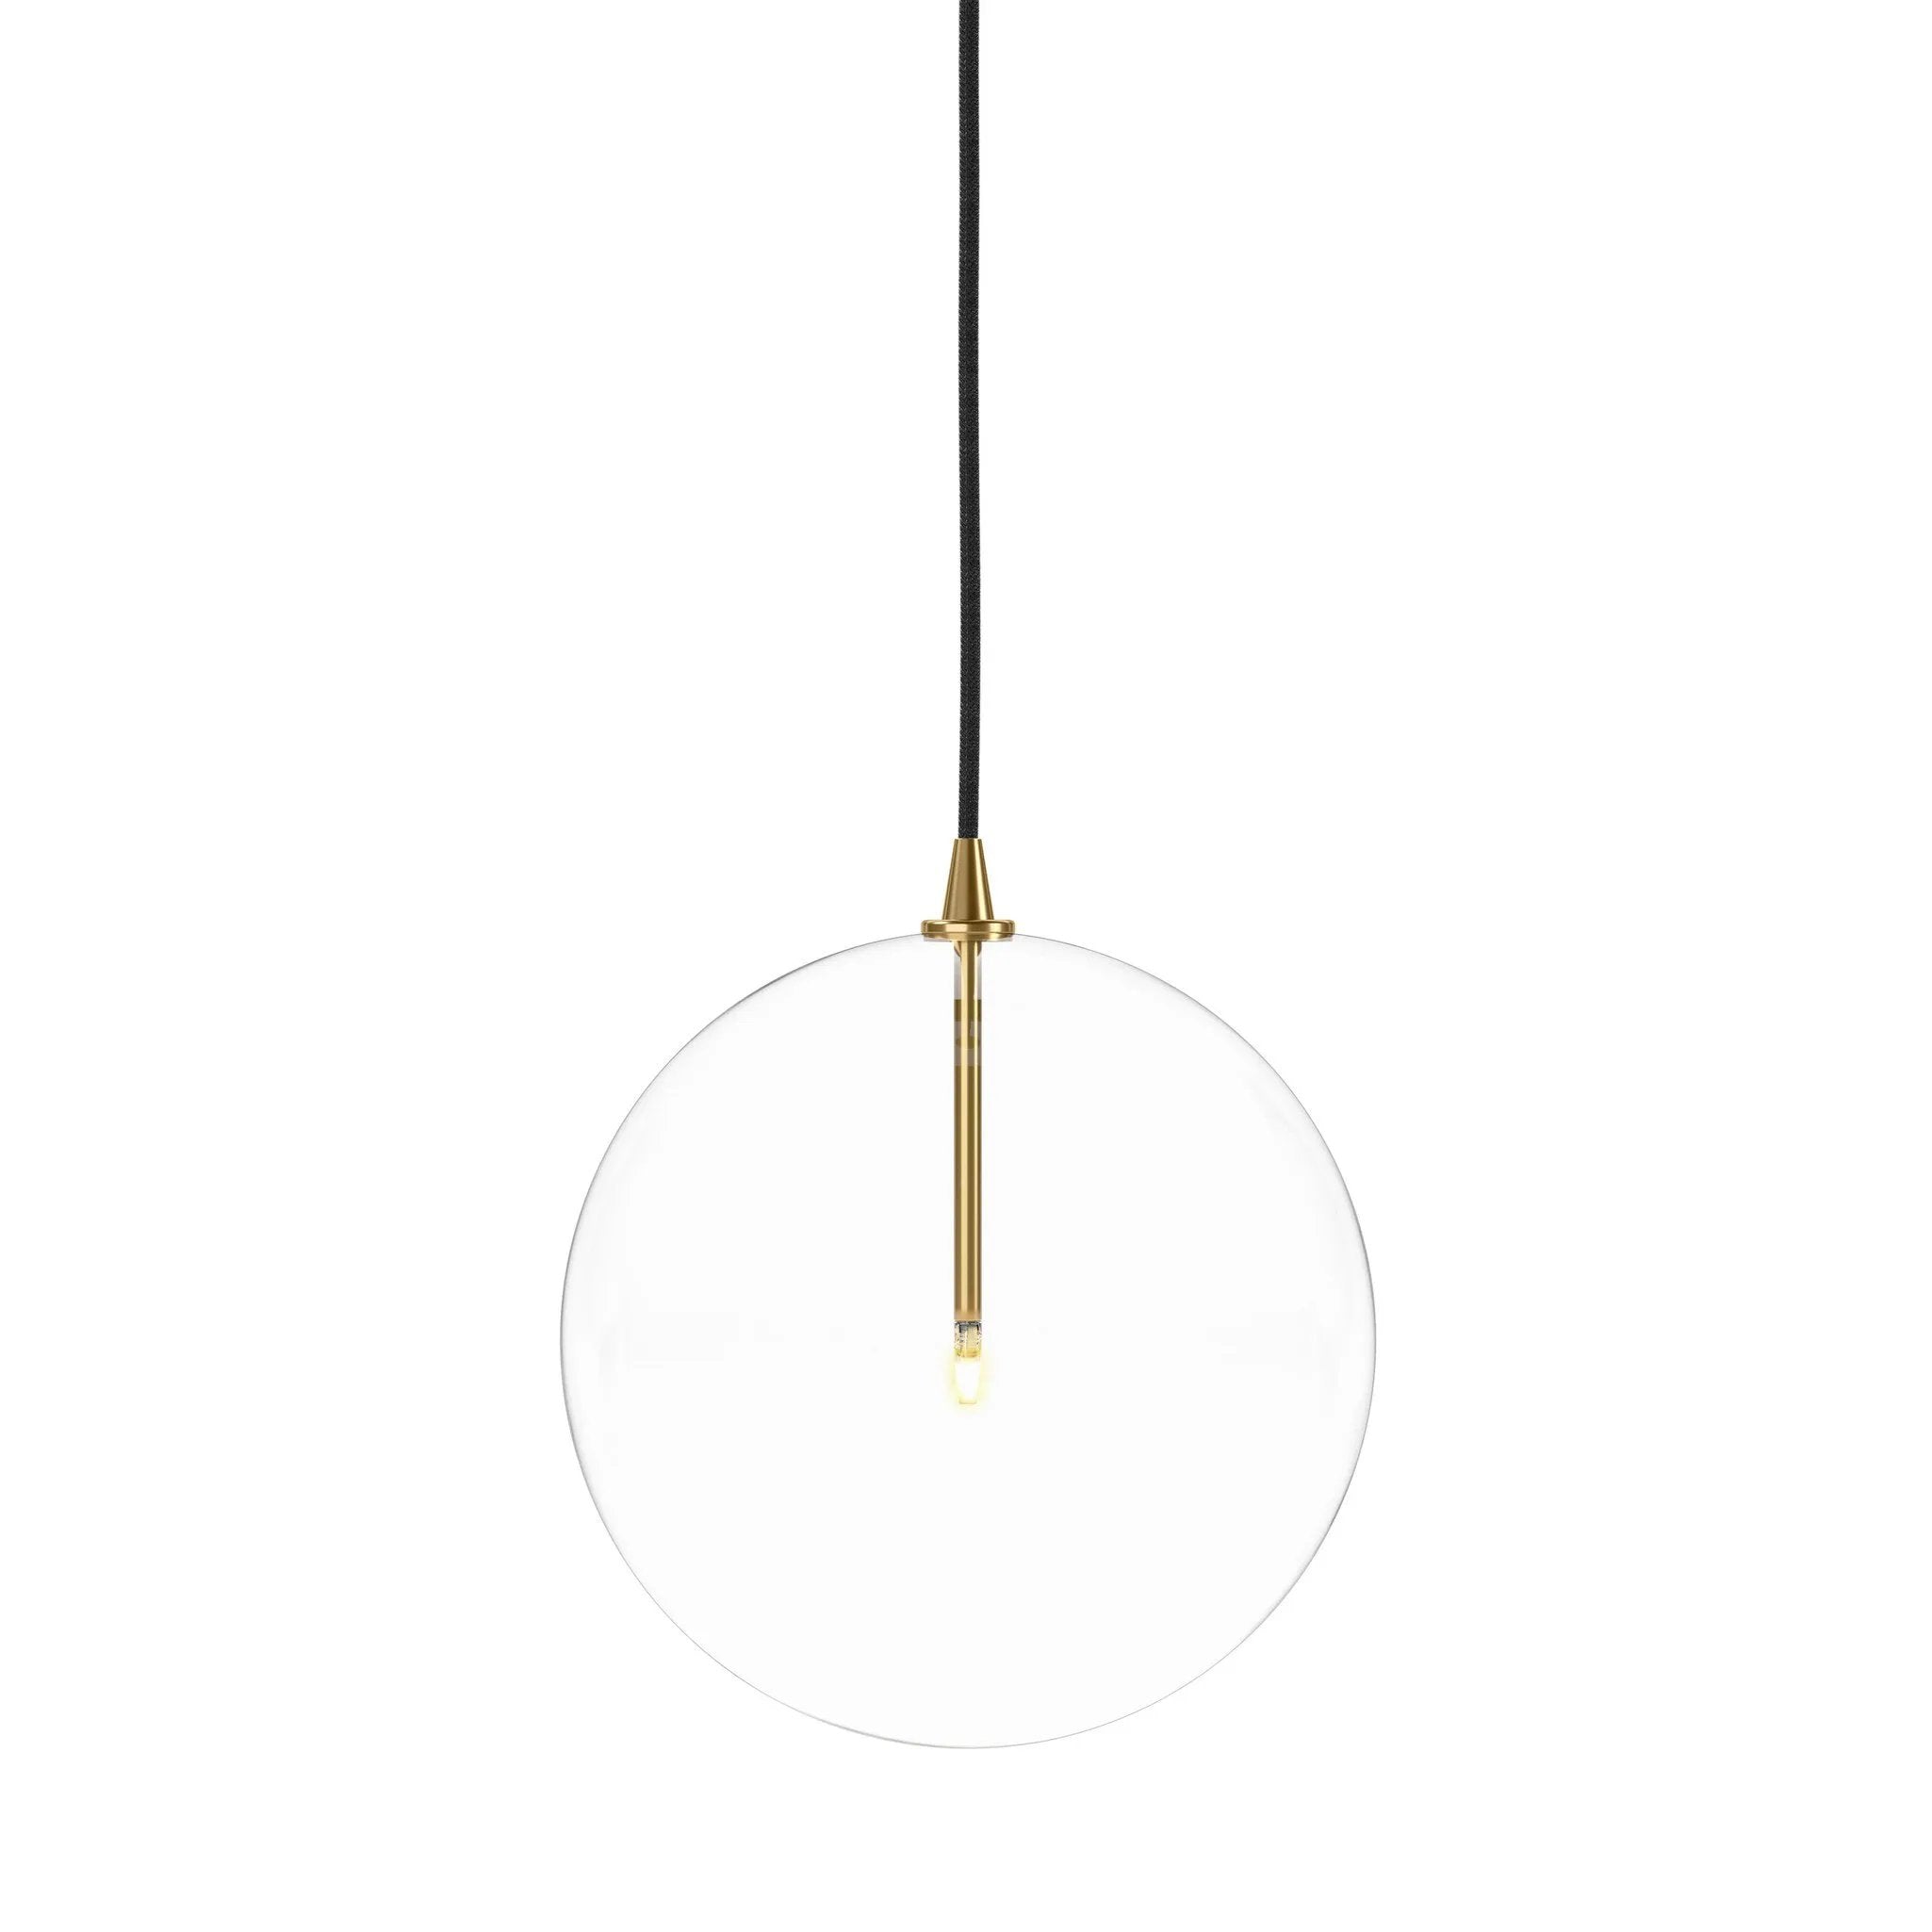 A single glass sphere dangles for a stunning effect. Each globe is individually blown, shaped and sculpted by hand through a one-hour process. Brass and glass are 98% recyclable. Designed and sustainably crafted in Poland by Schwung.Overall Dimensions11.75"w x 11.75"d x 19.25"hFull Details &amp; SpecificationsTear Shee Amethyst Home provides interior design, new home construction design consulting, vintage area rugs, and lighting in the Los Angeles metro area.